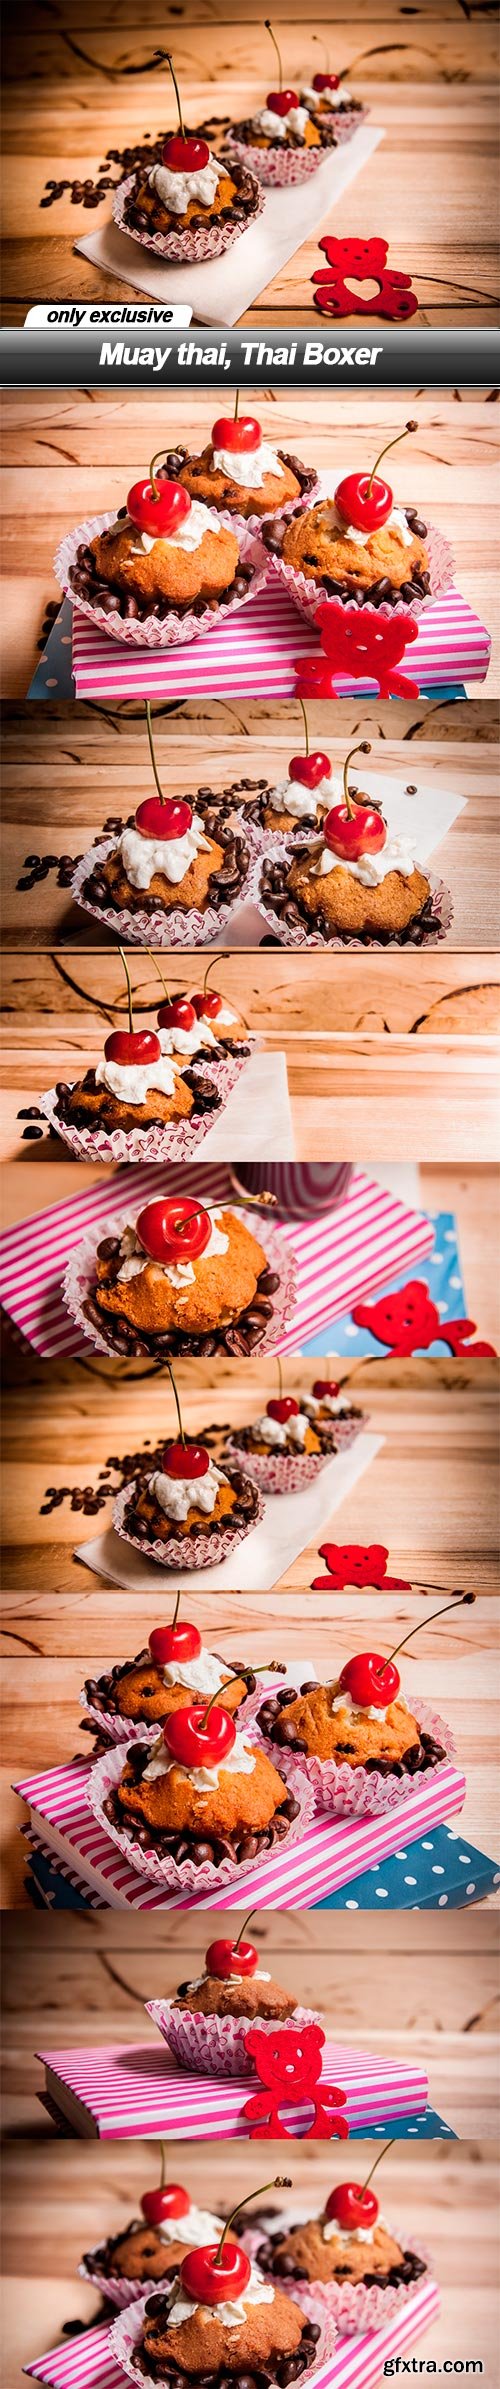 Muffin cakes with chocolate - 8 UHQ JPEG